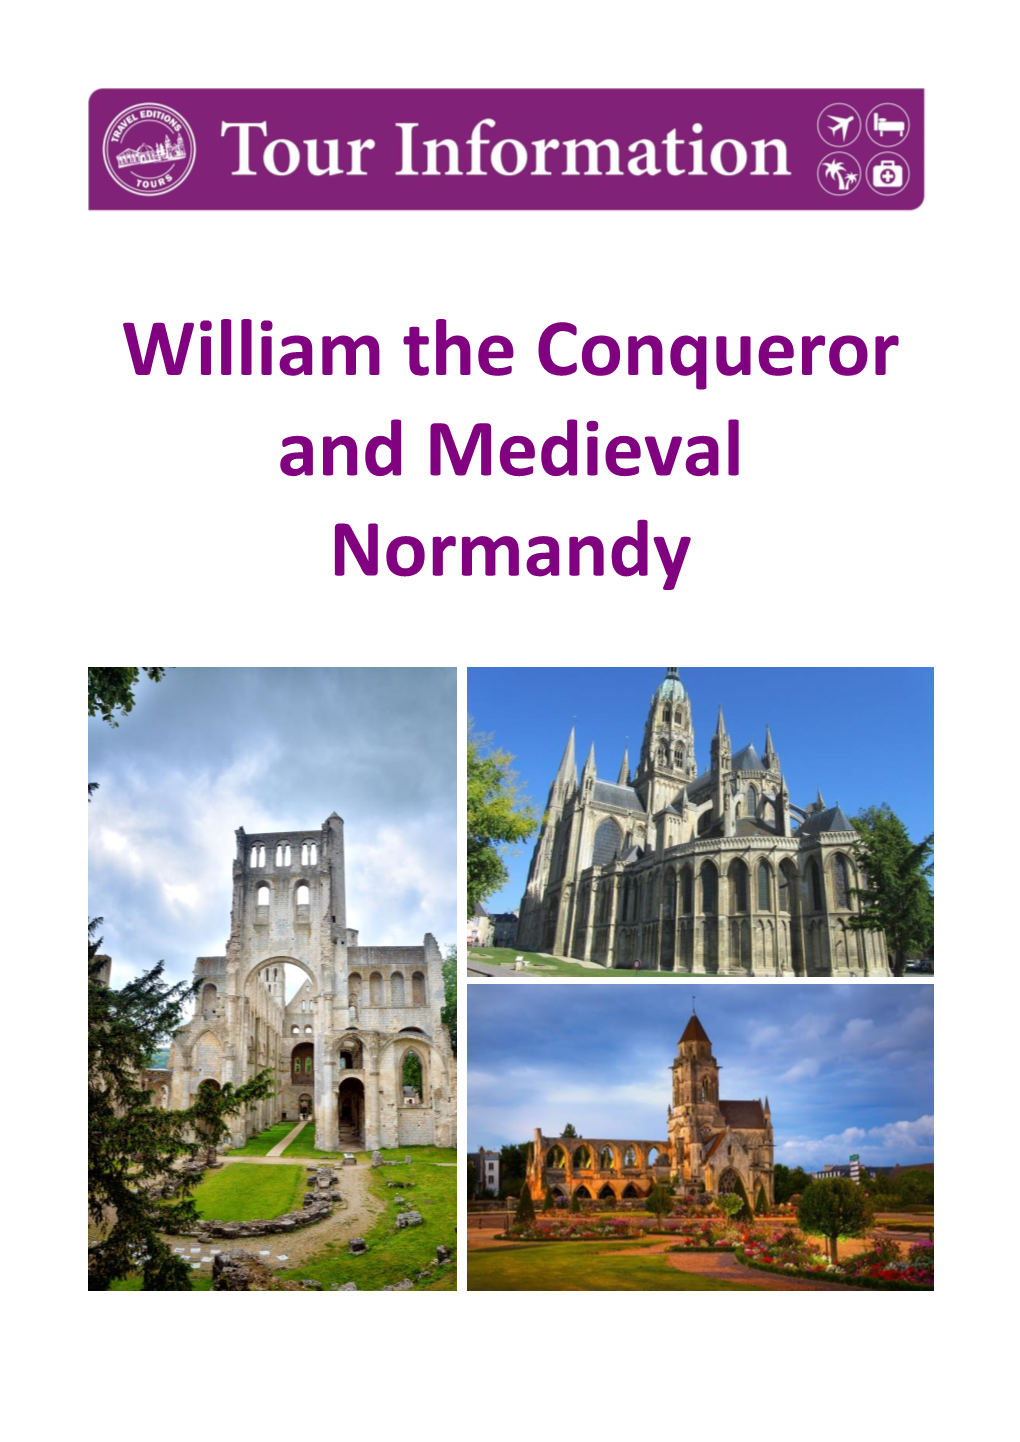 William the Conqueror and Medieval Normandy